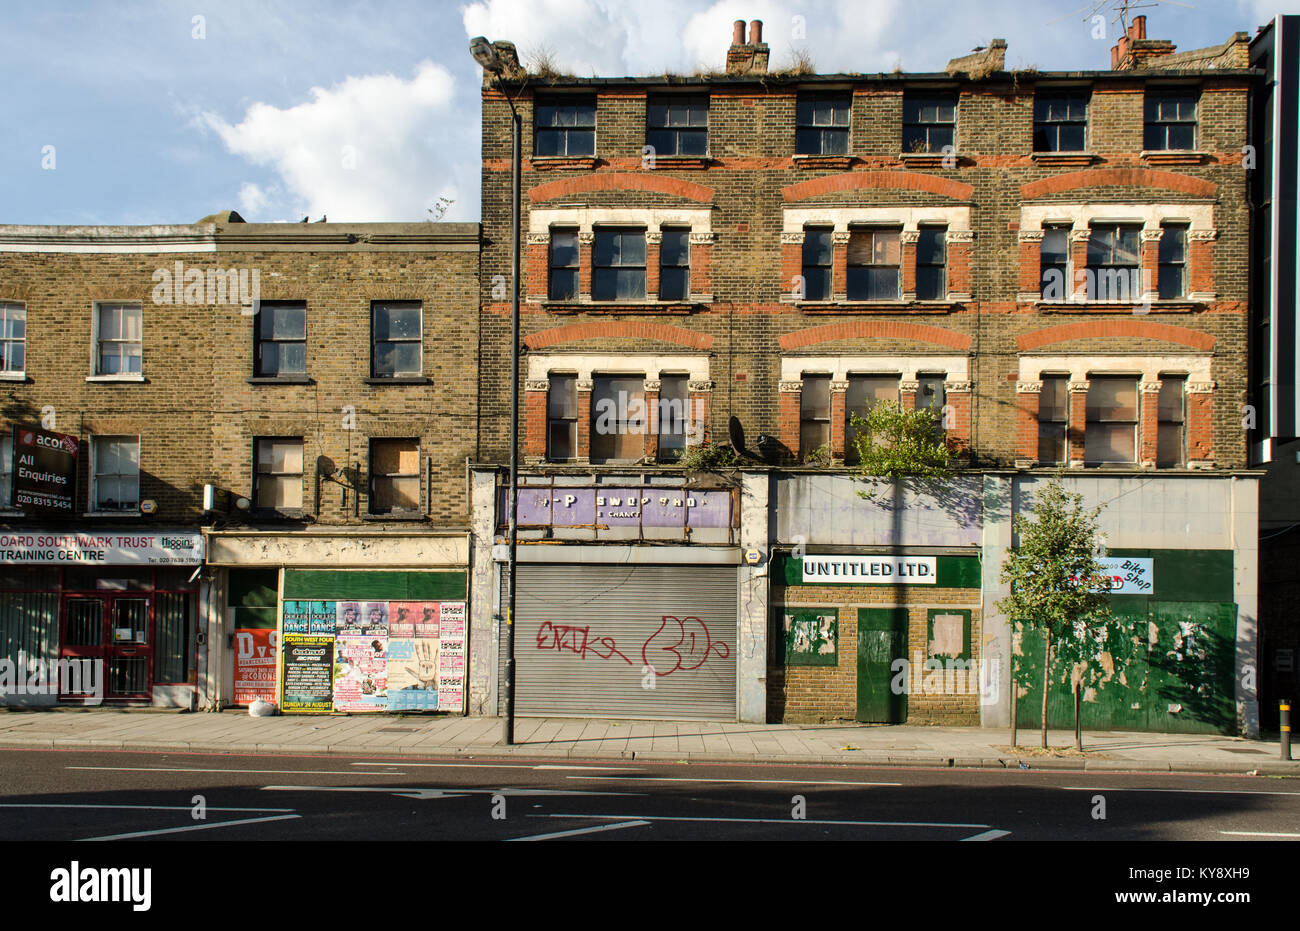 London, England, UK - July 9, 2014: Scruffy shops occupy run-down buildings on the busy Old Kent Road in south east London, a major urban regeneration Stock Photo